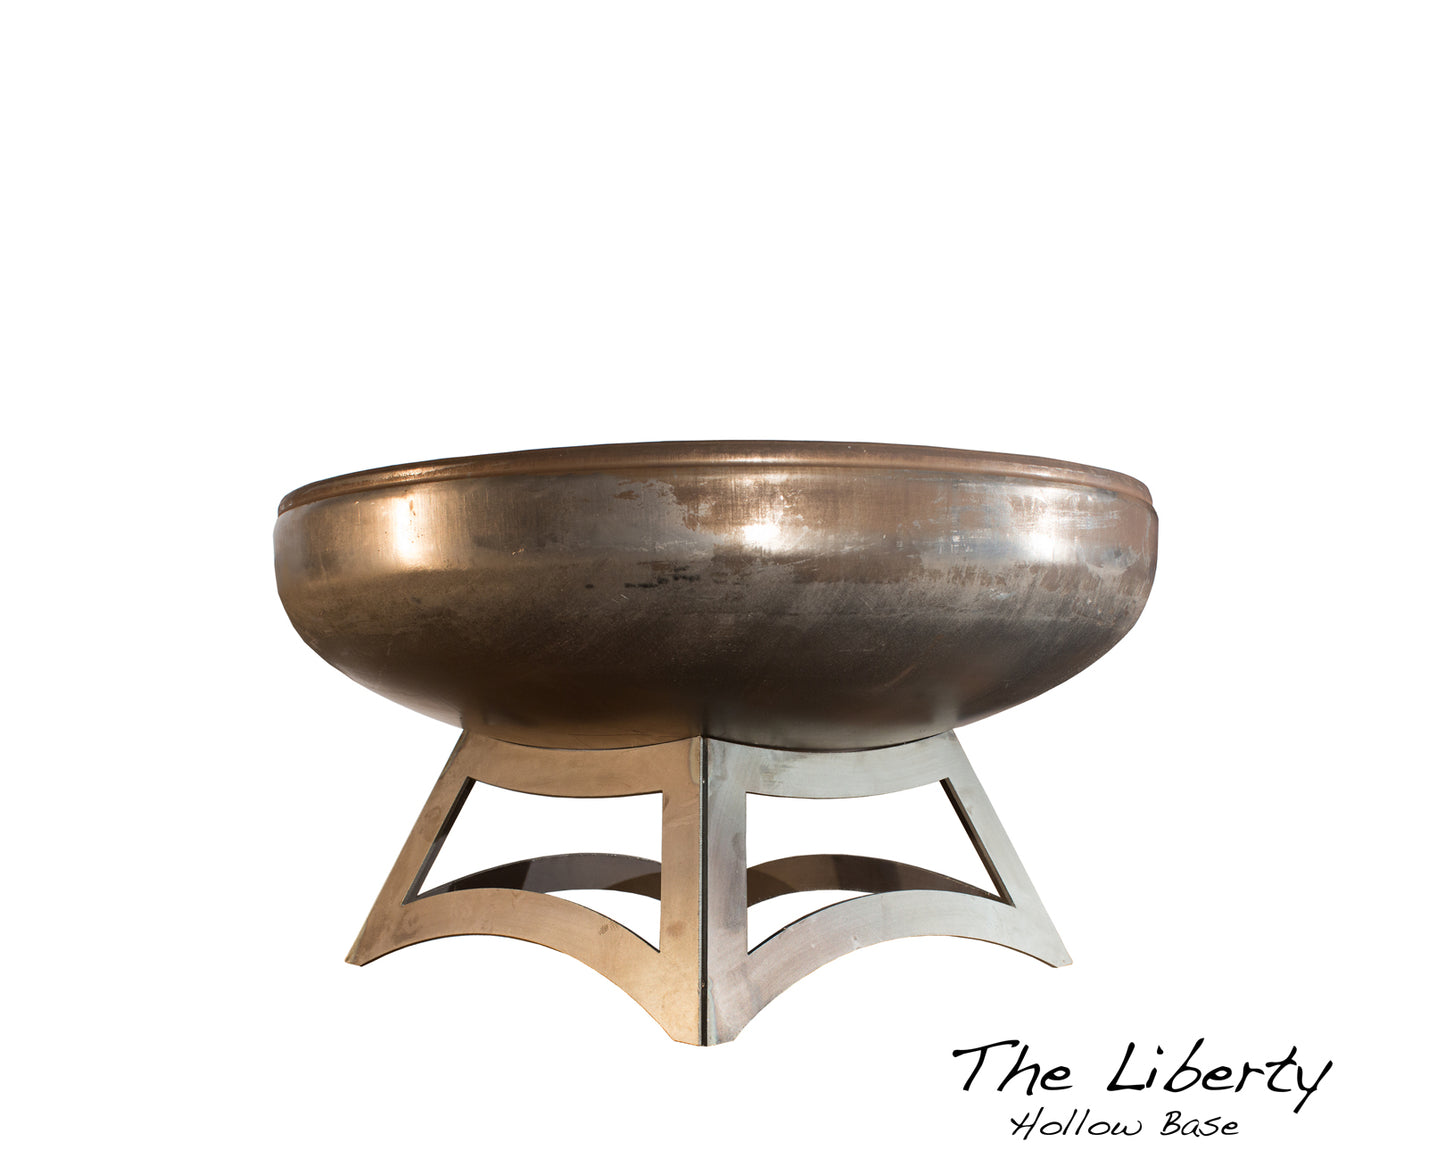 Liberty Fire Pit with Hollow Base